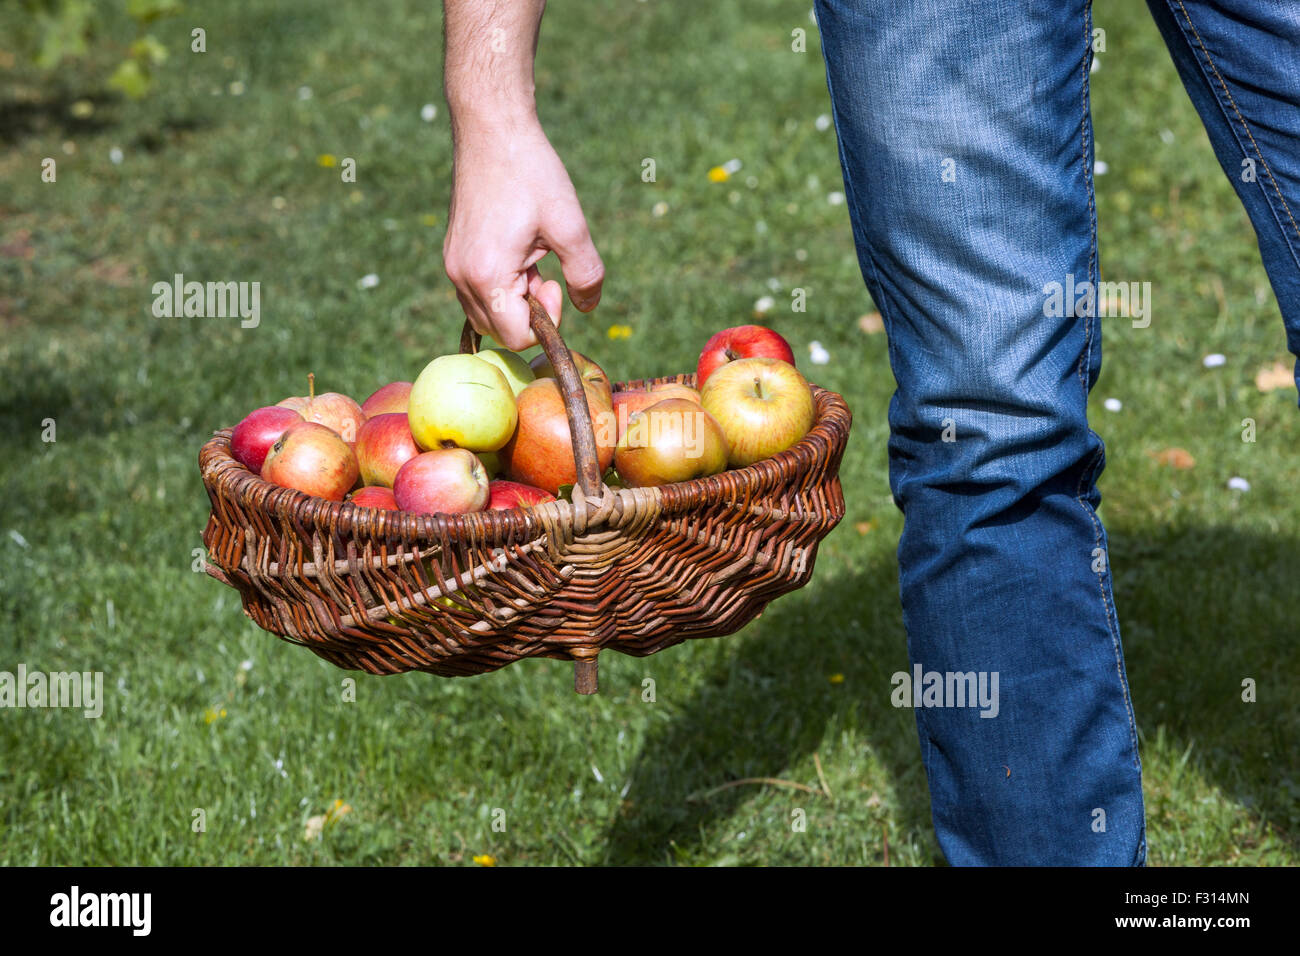 A man carries apples in basket, wicker basket autumn harvest, picked fresh fruits Stock Photo